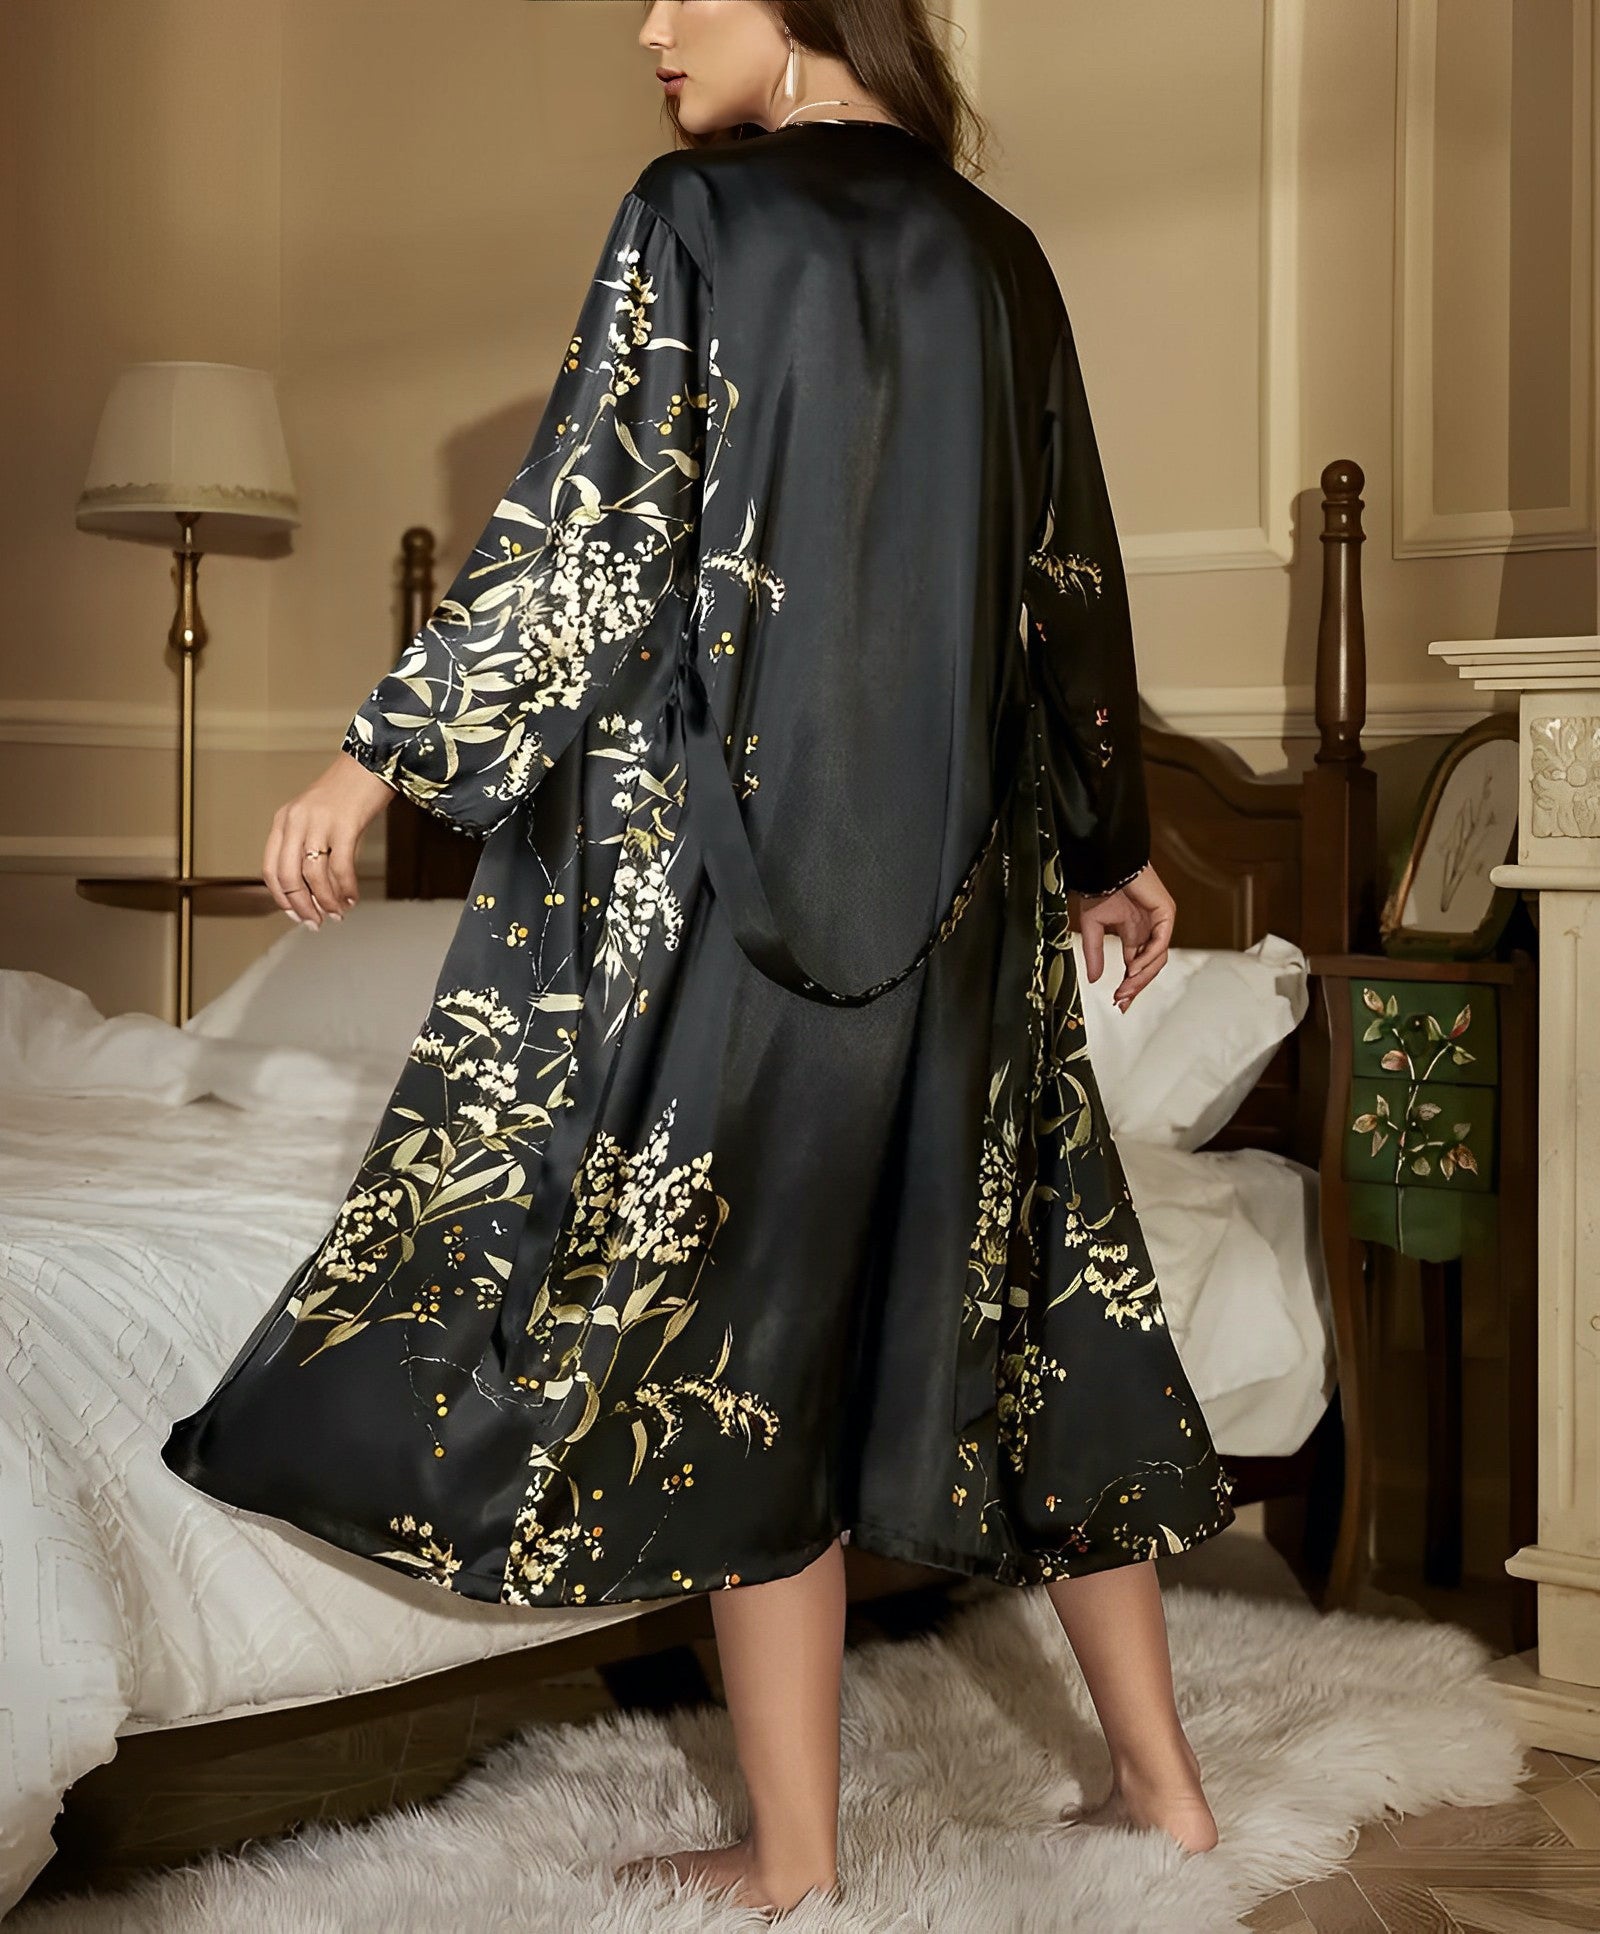 Housecoats, Dressing Gown Floral Print Satin Pajama Set, Women's Loungewear &amp; Sleepwear, 2 Pieces Women's Belted Sleep Dress Long Sleeve Belted Robe and Cowl Neck Underdress 